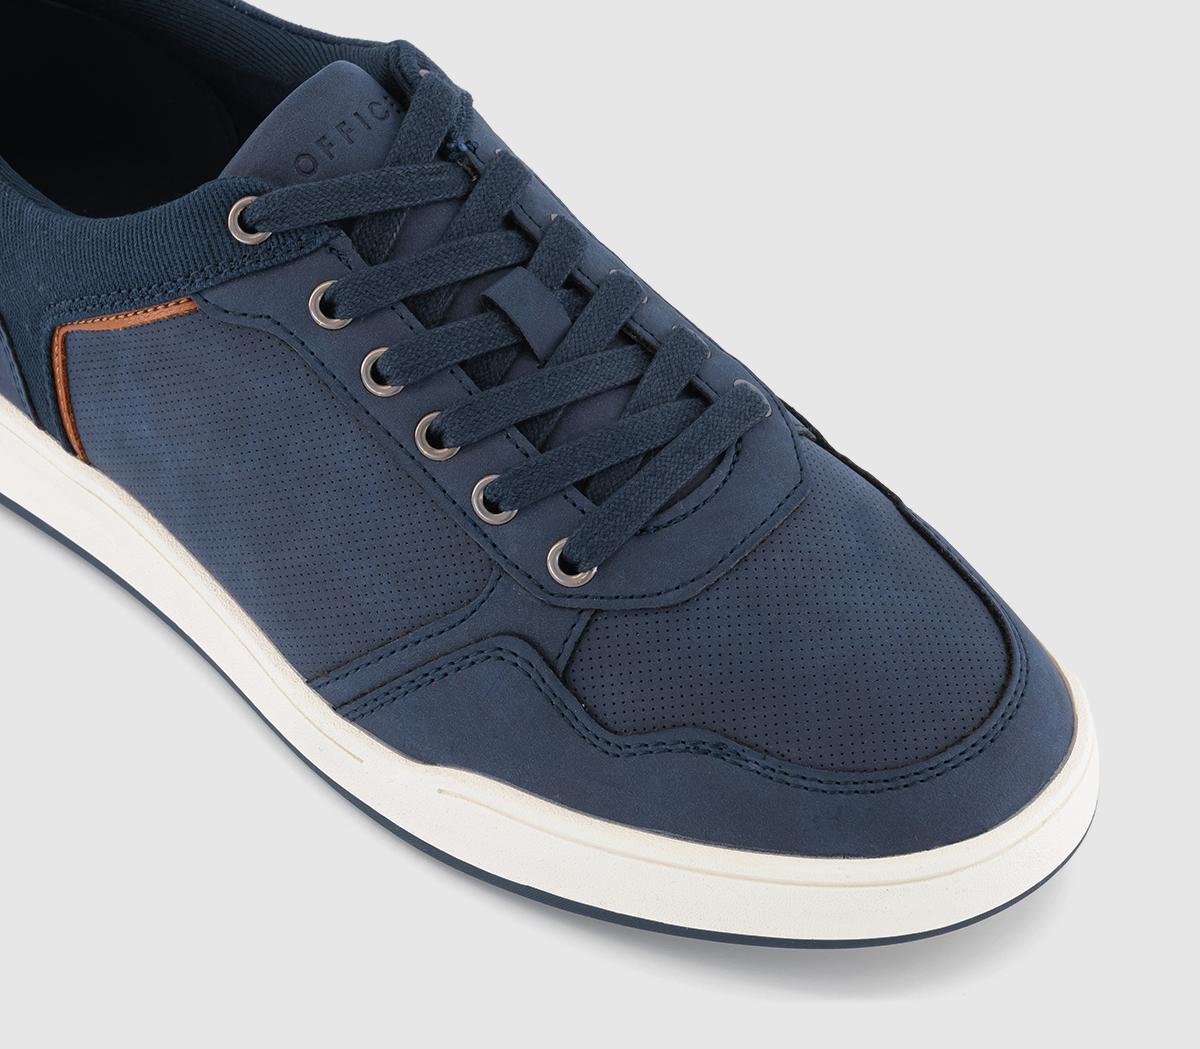 OFFICE Cavendish 6 Eye Trainers Navy - Men's Trainers